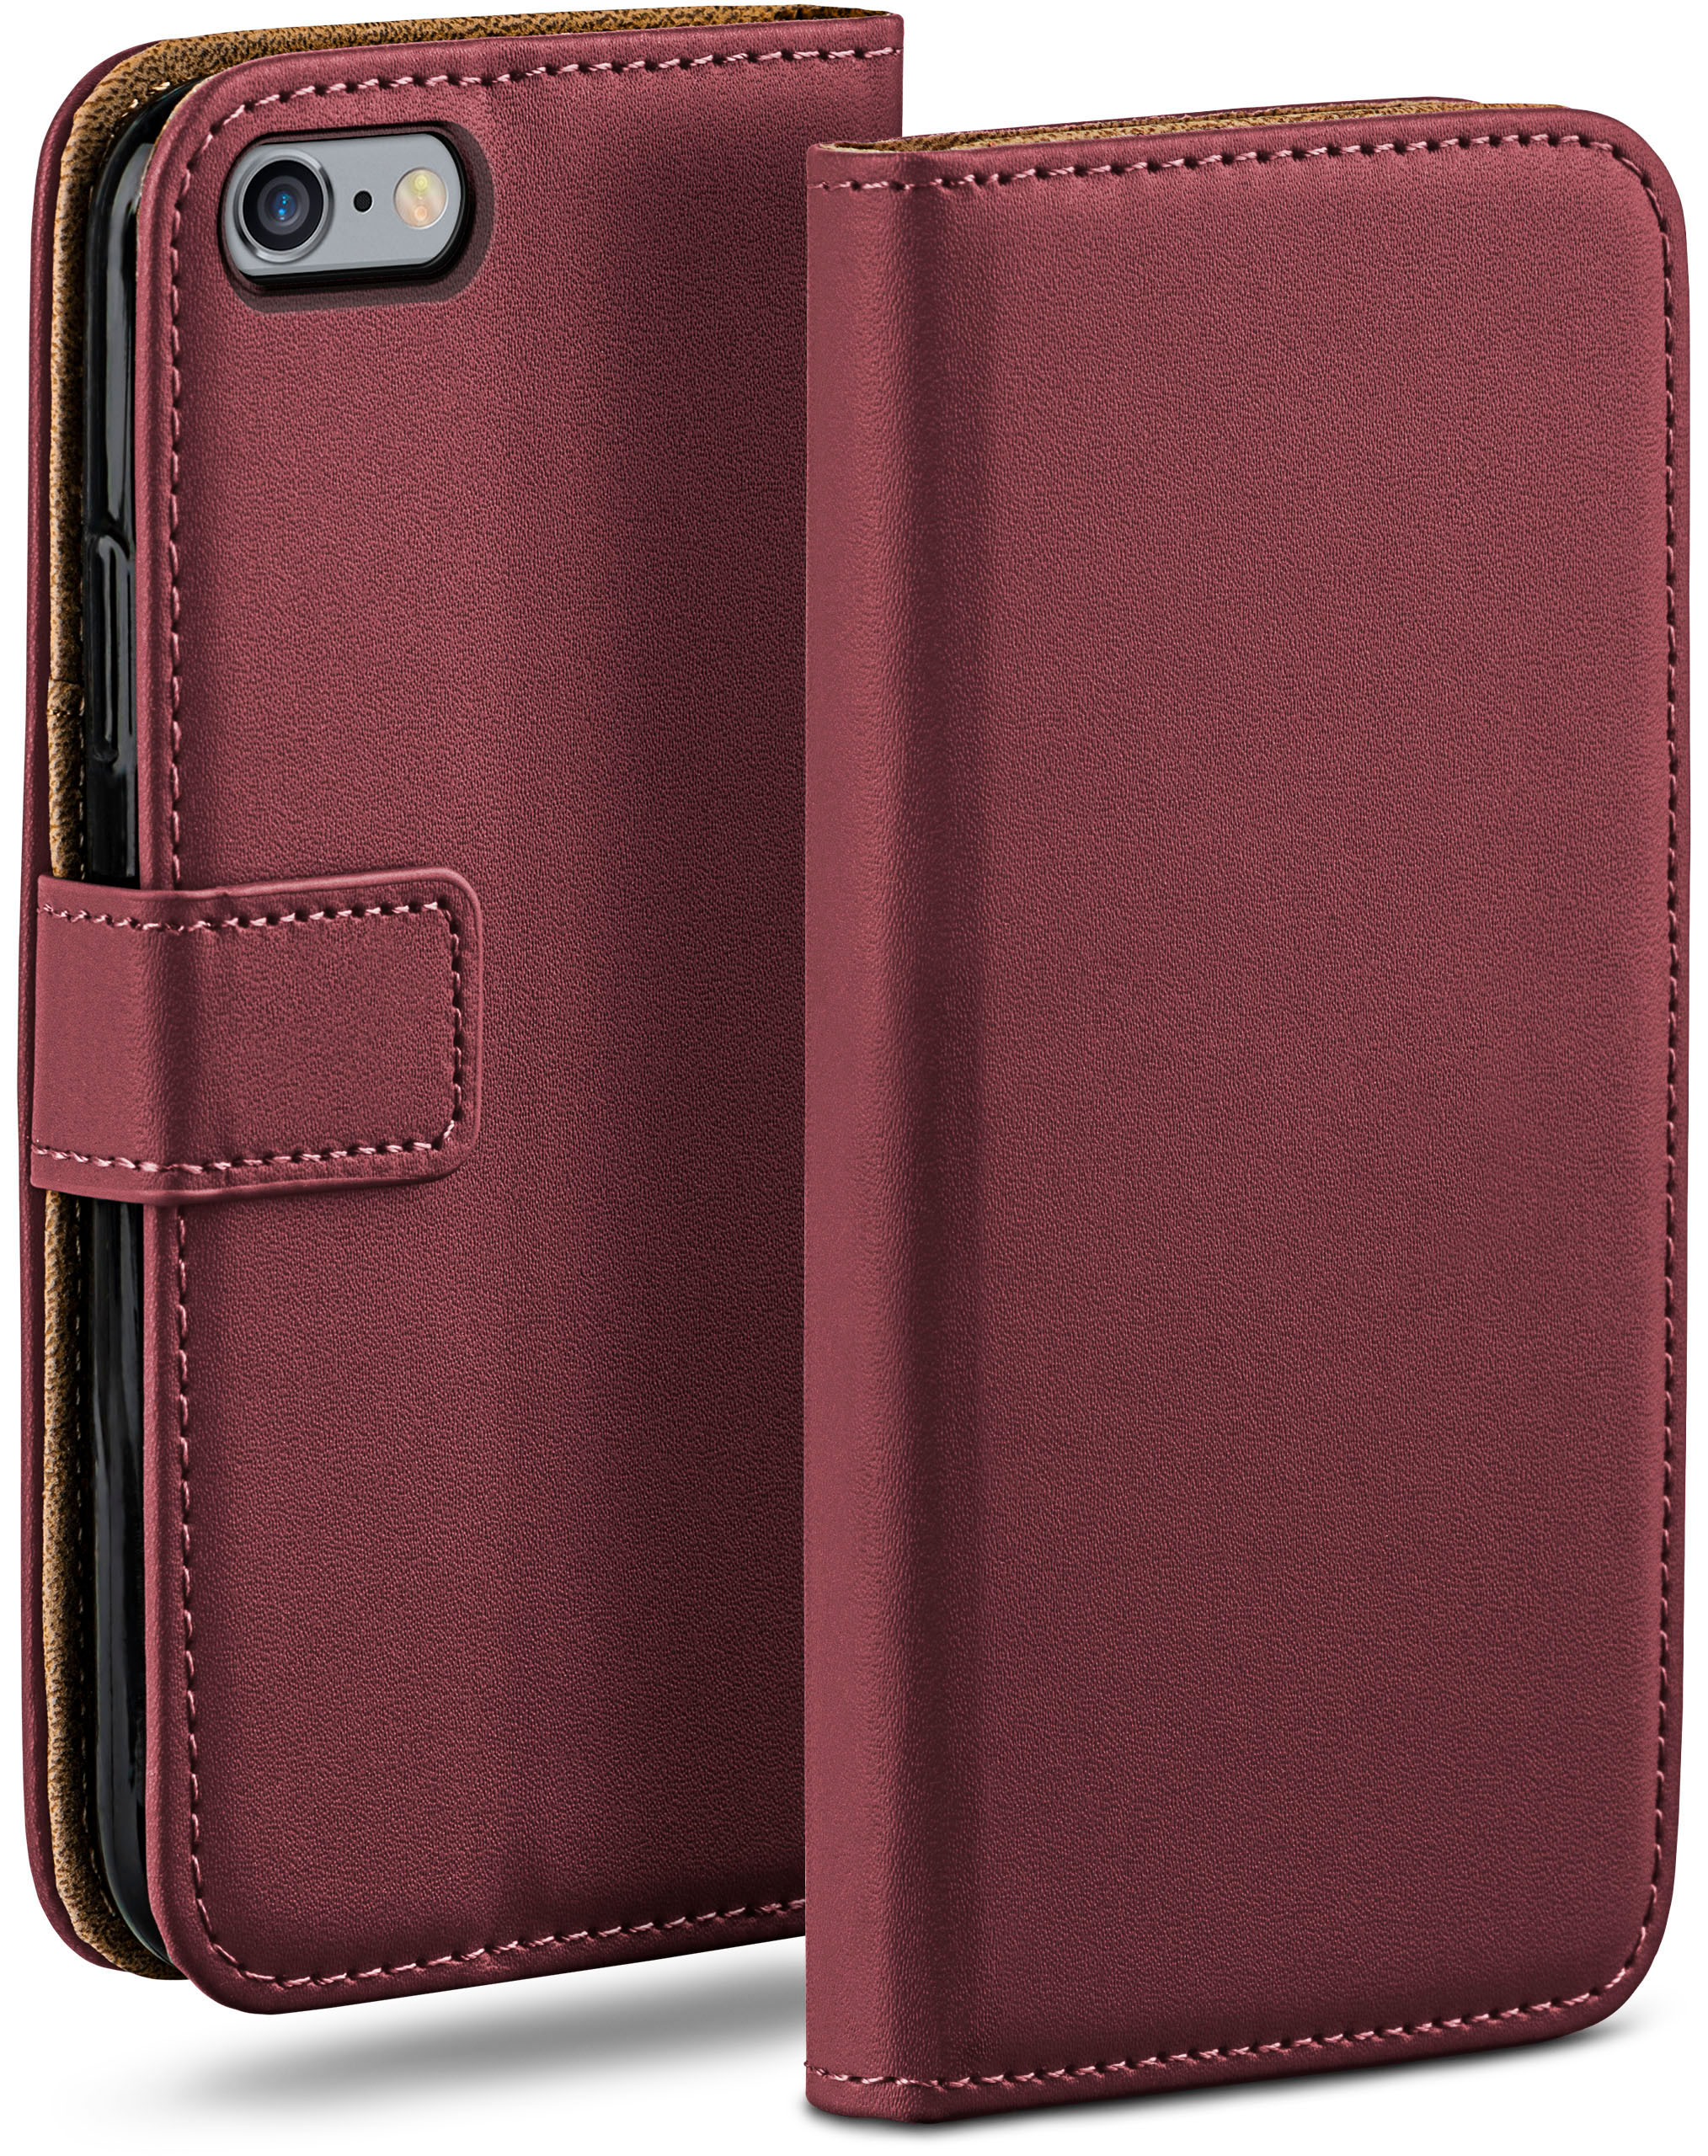 MOEX Book Case, Bookcover, iPhone 6, iPhone Maroon-Red 6s Apple, 